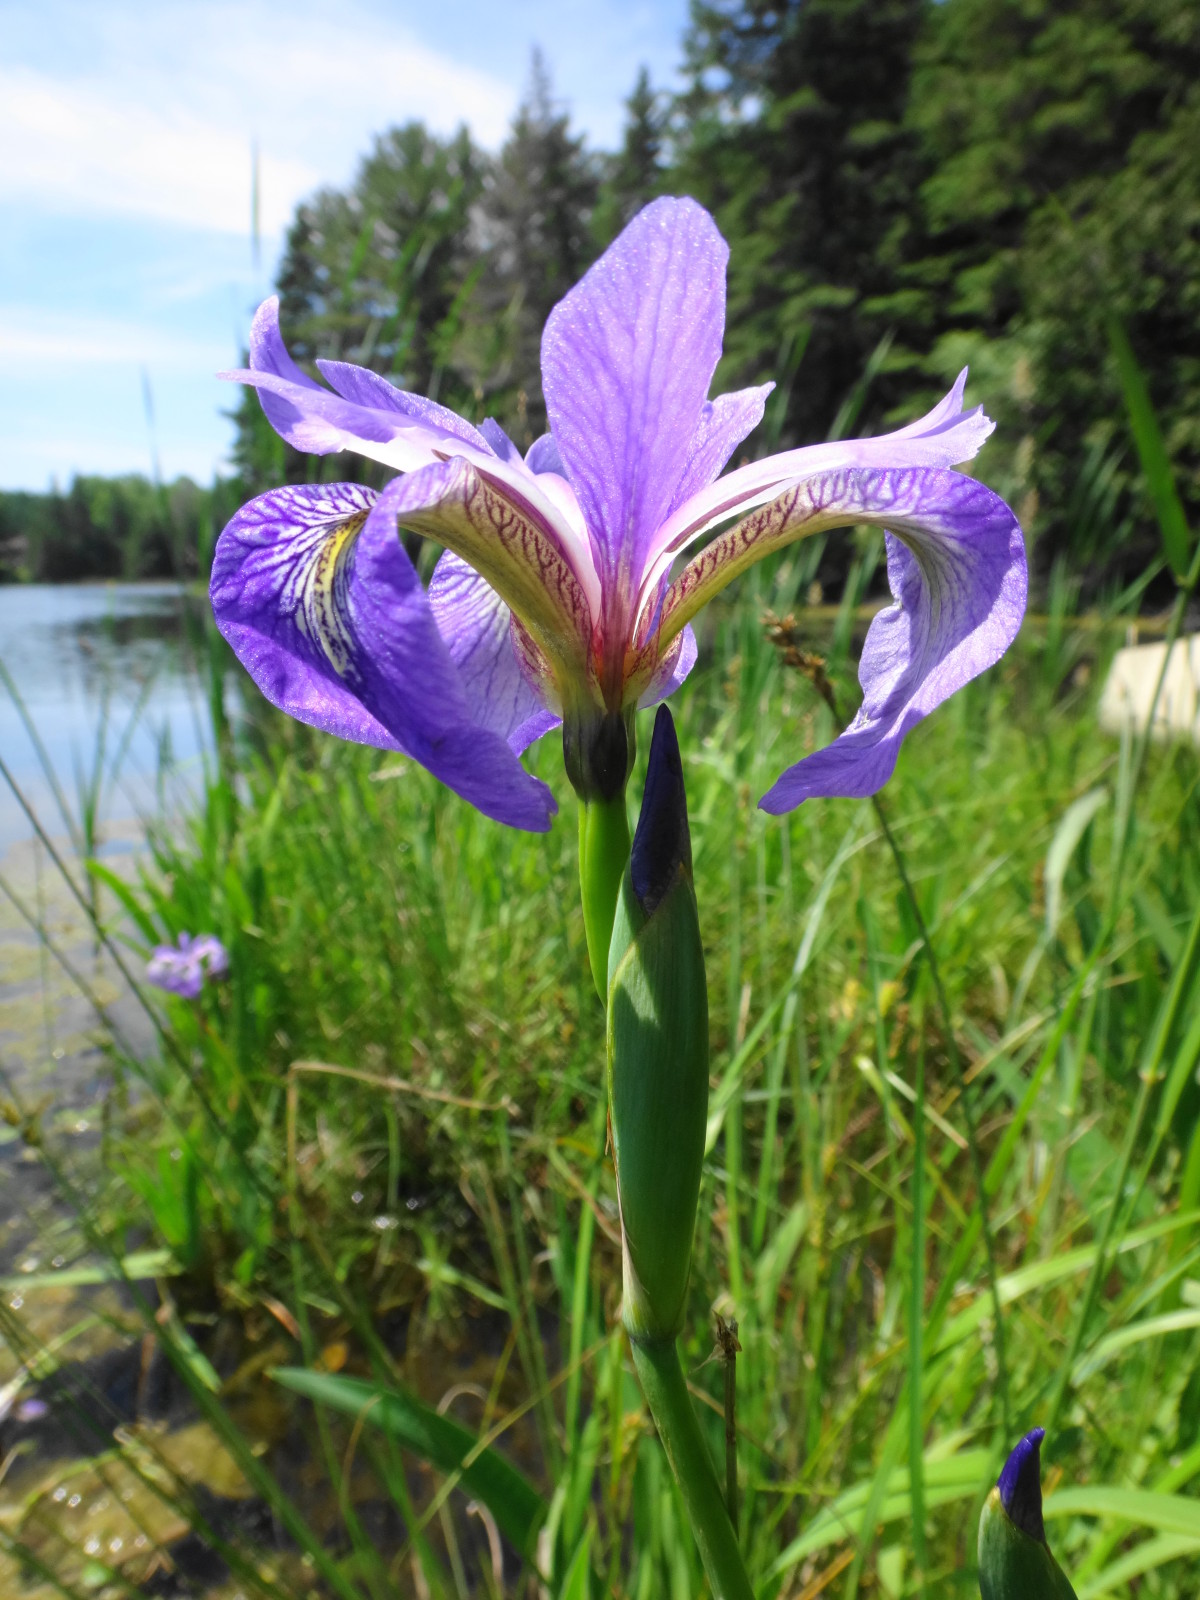 A close-up photograph of a purple iris in bloom on the shore of the Snye River.